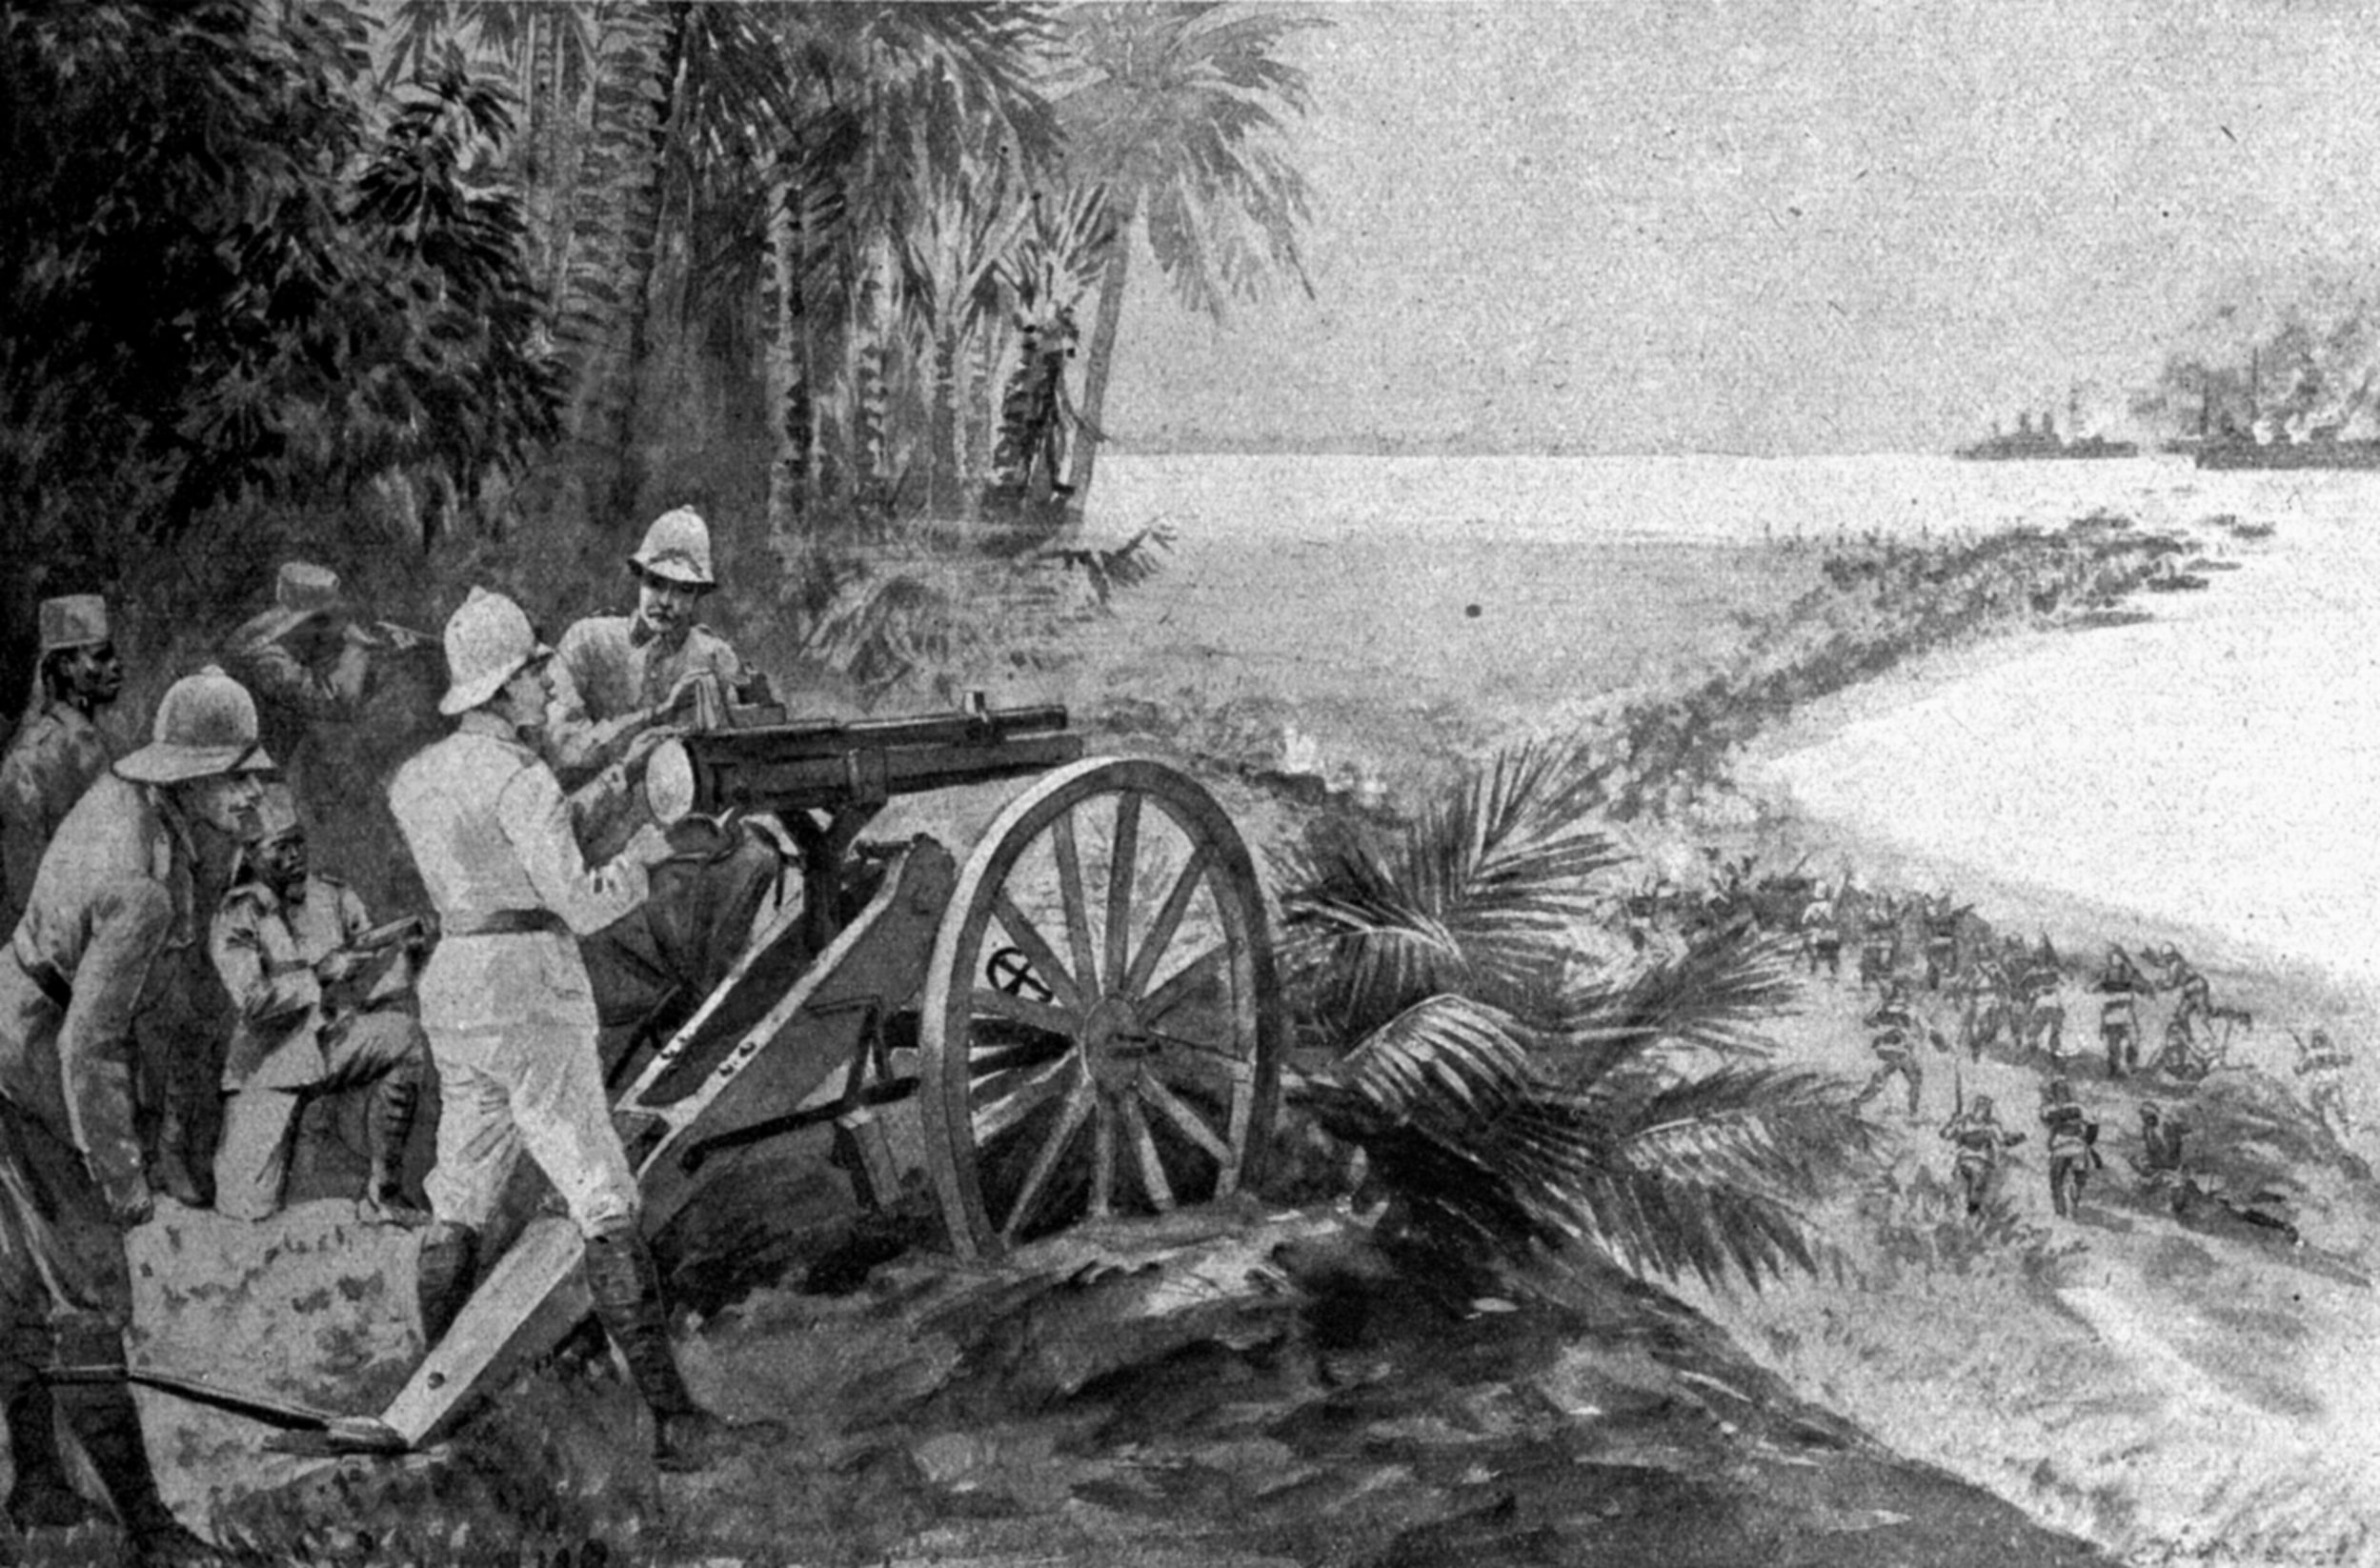 In this period illustration, Lettow-Vorbeck’s troops are shown repelling the British landings in German East Africa in November 1914.